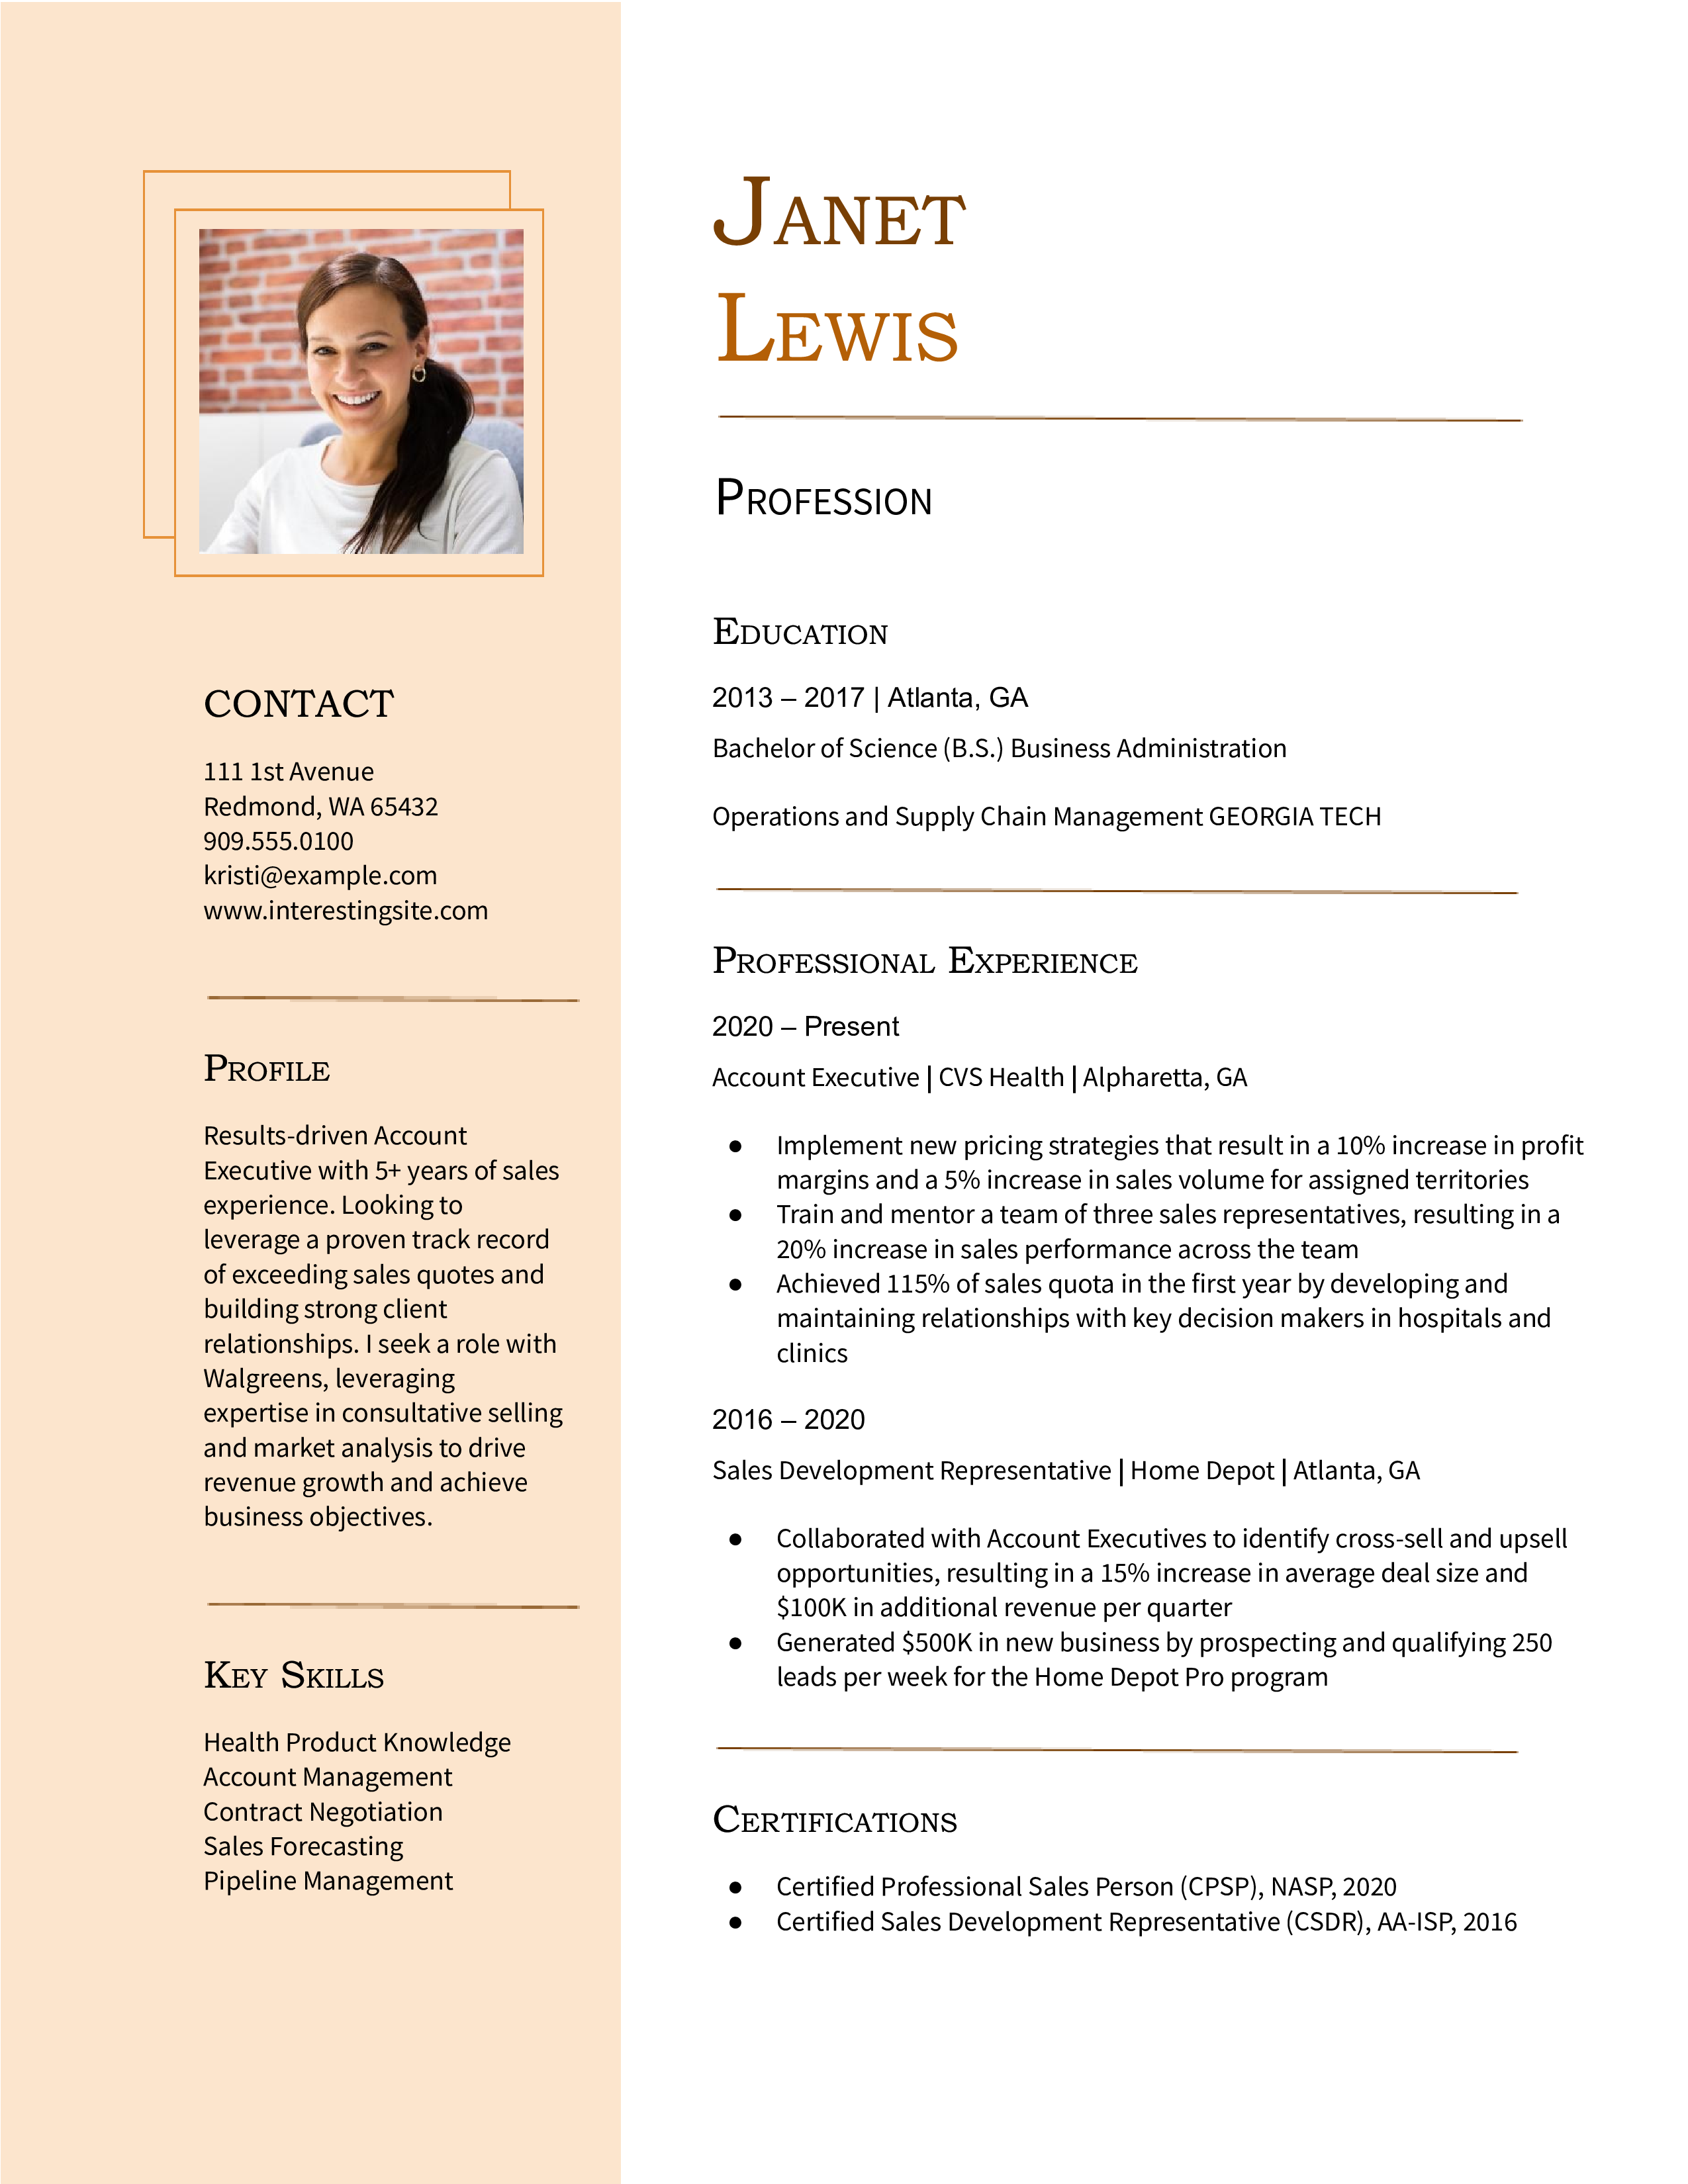 Sales Resume Templates and Examples.docx